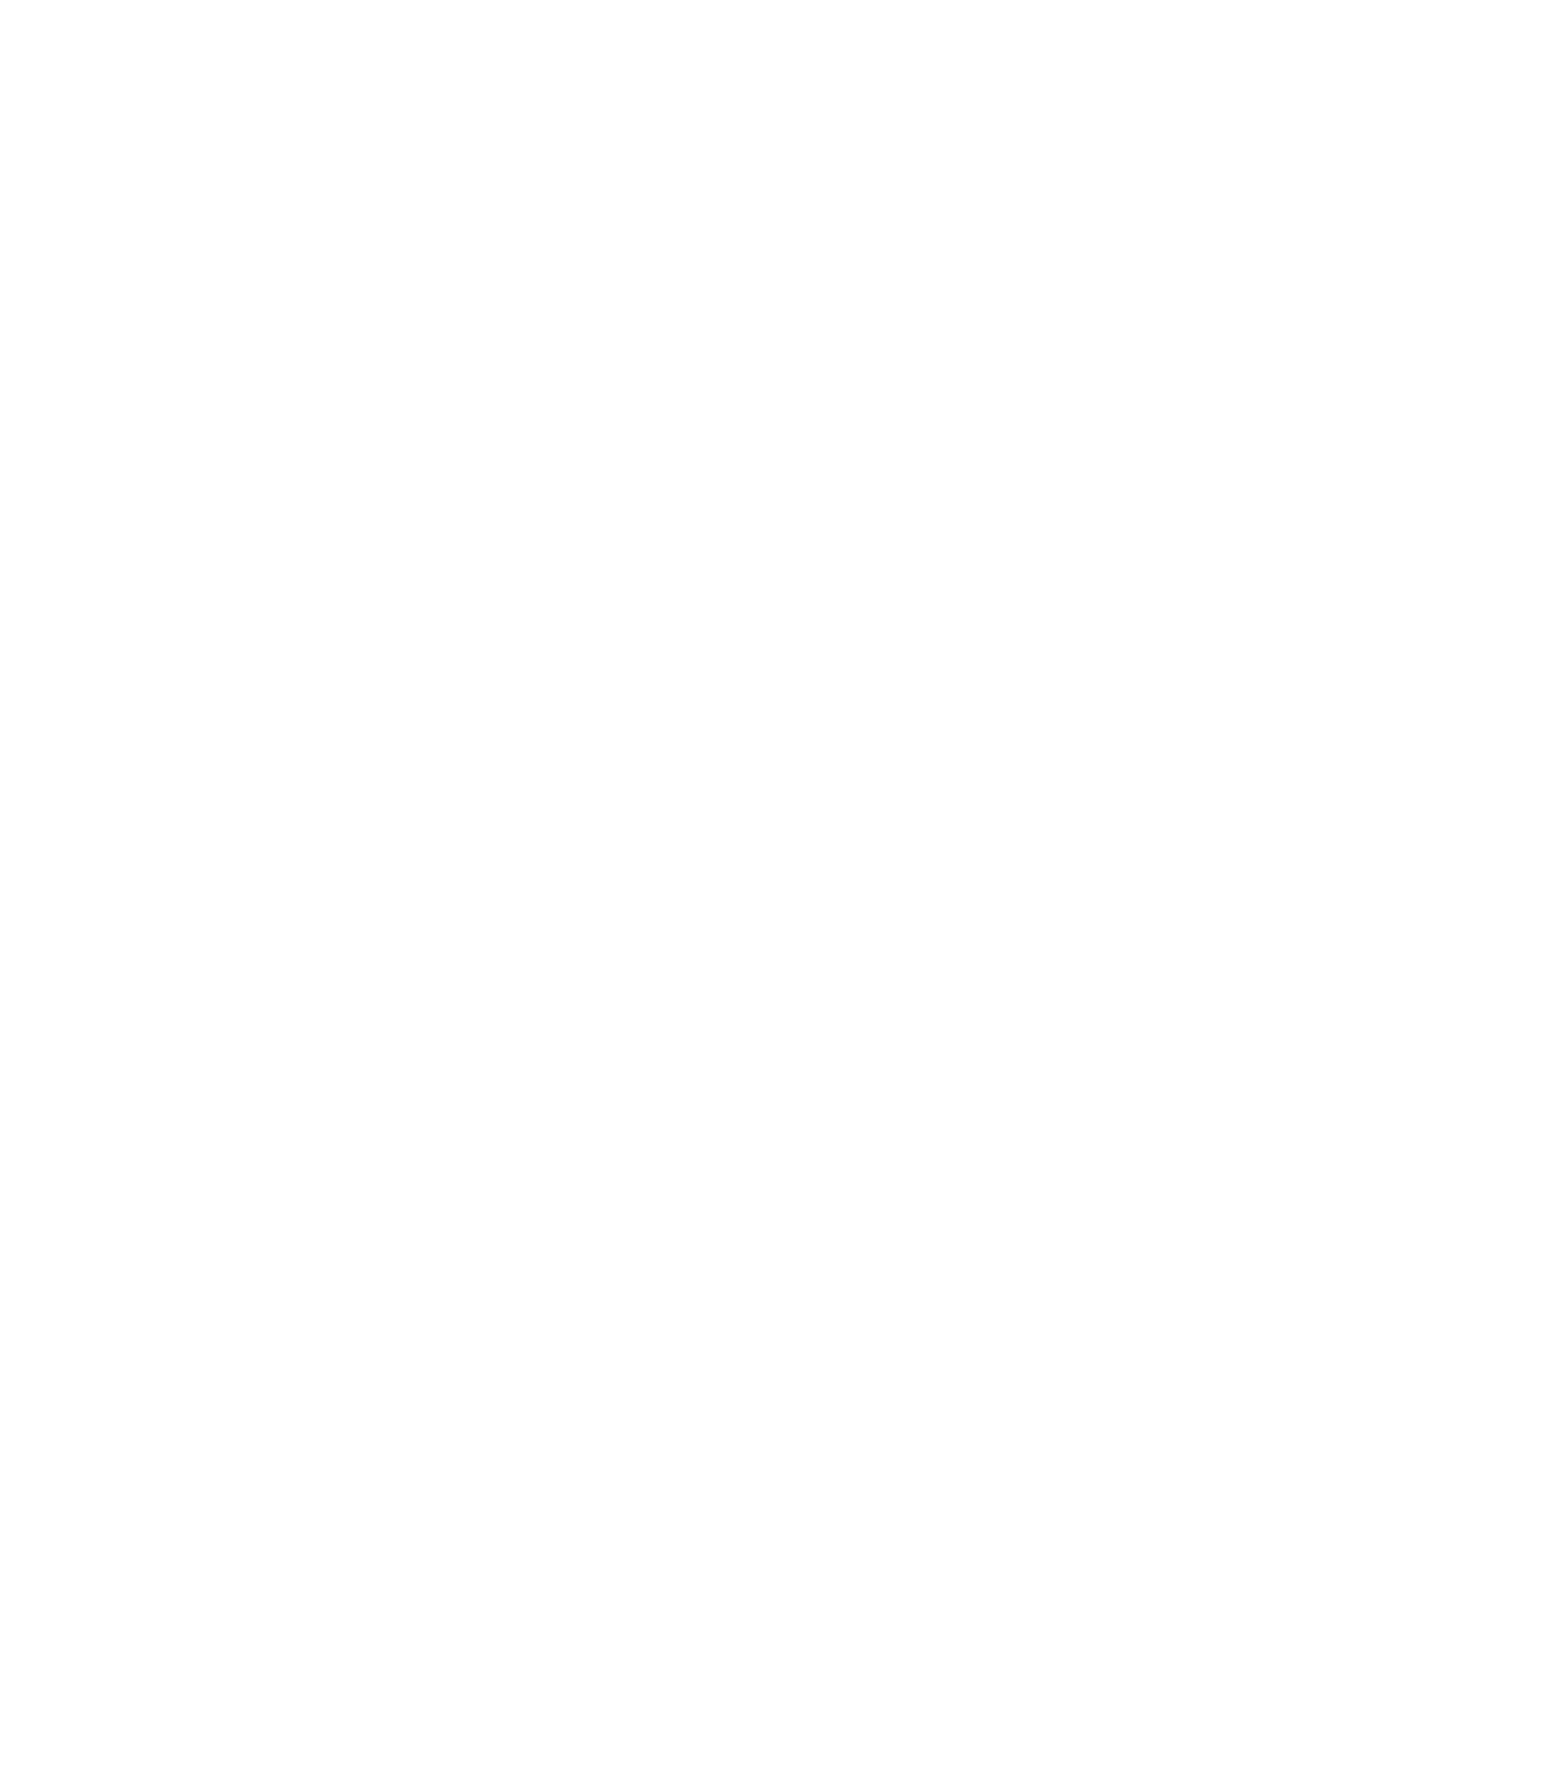 Altered sketch of an alphabet chart demonstrating the connections between letters in the Roman, Greek, Phoenician, Hebrew, and Arabic alphabets. In this version, the chart begins to disintegrate partway through as the letters fall down upon each other in a jumble.